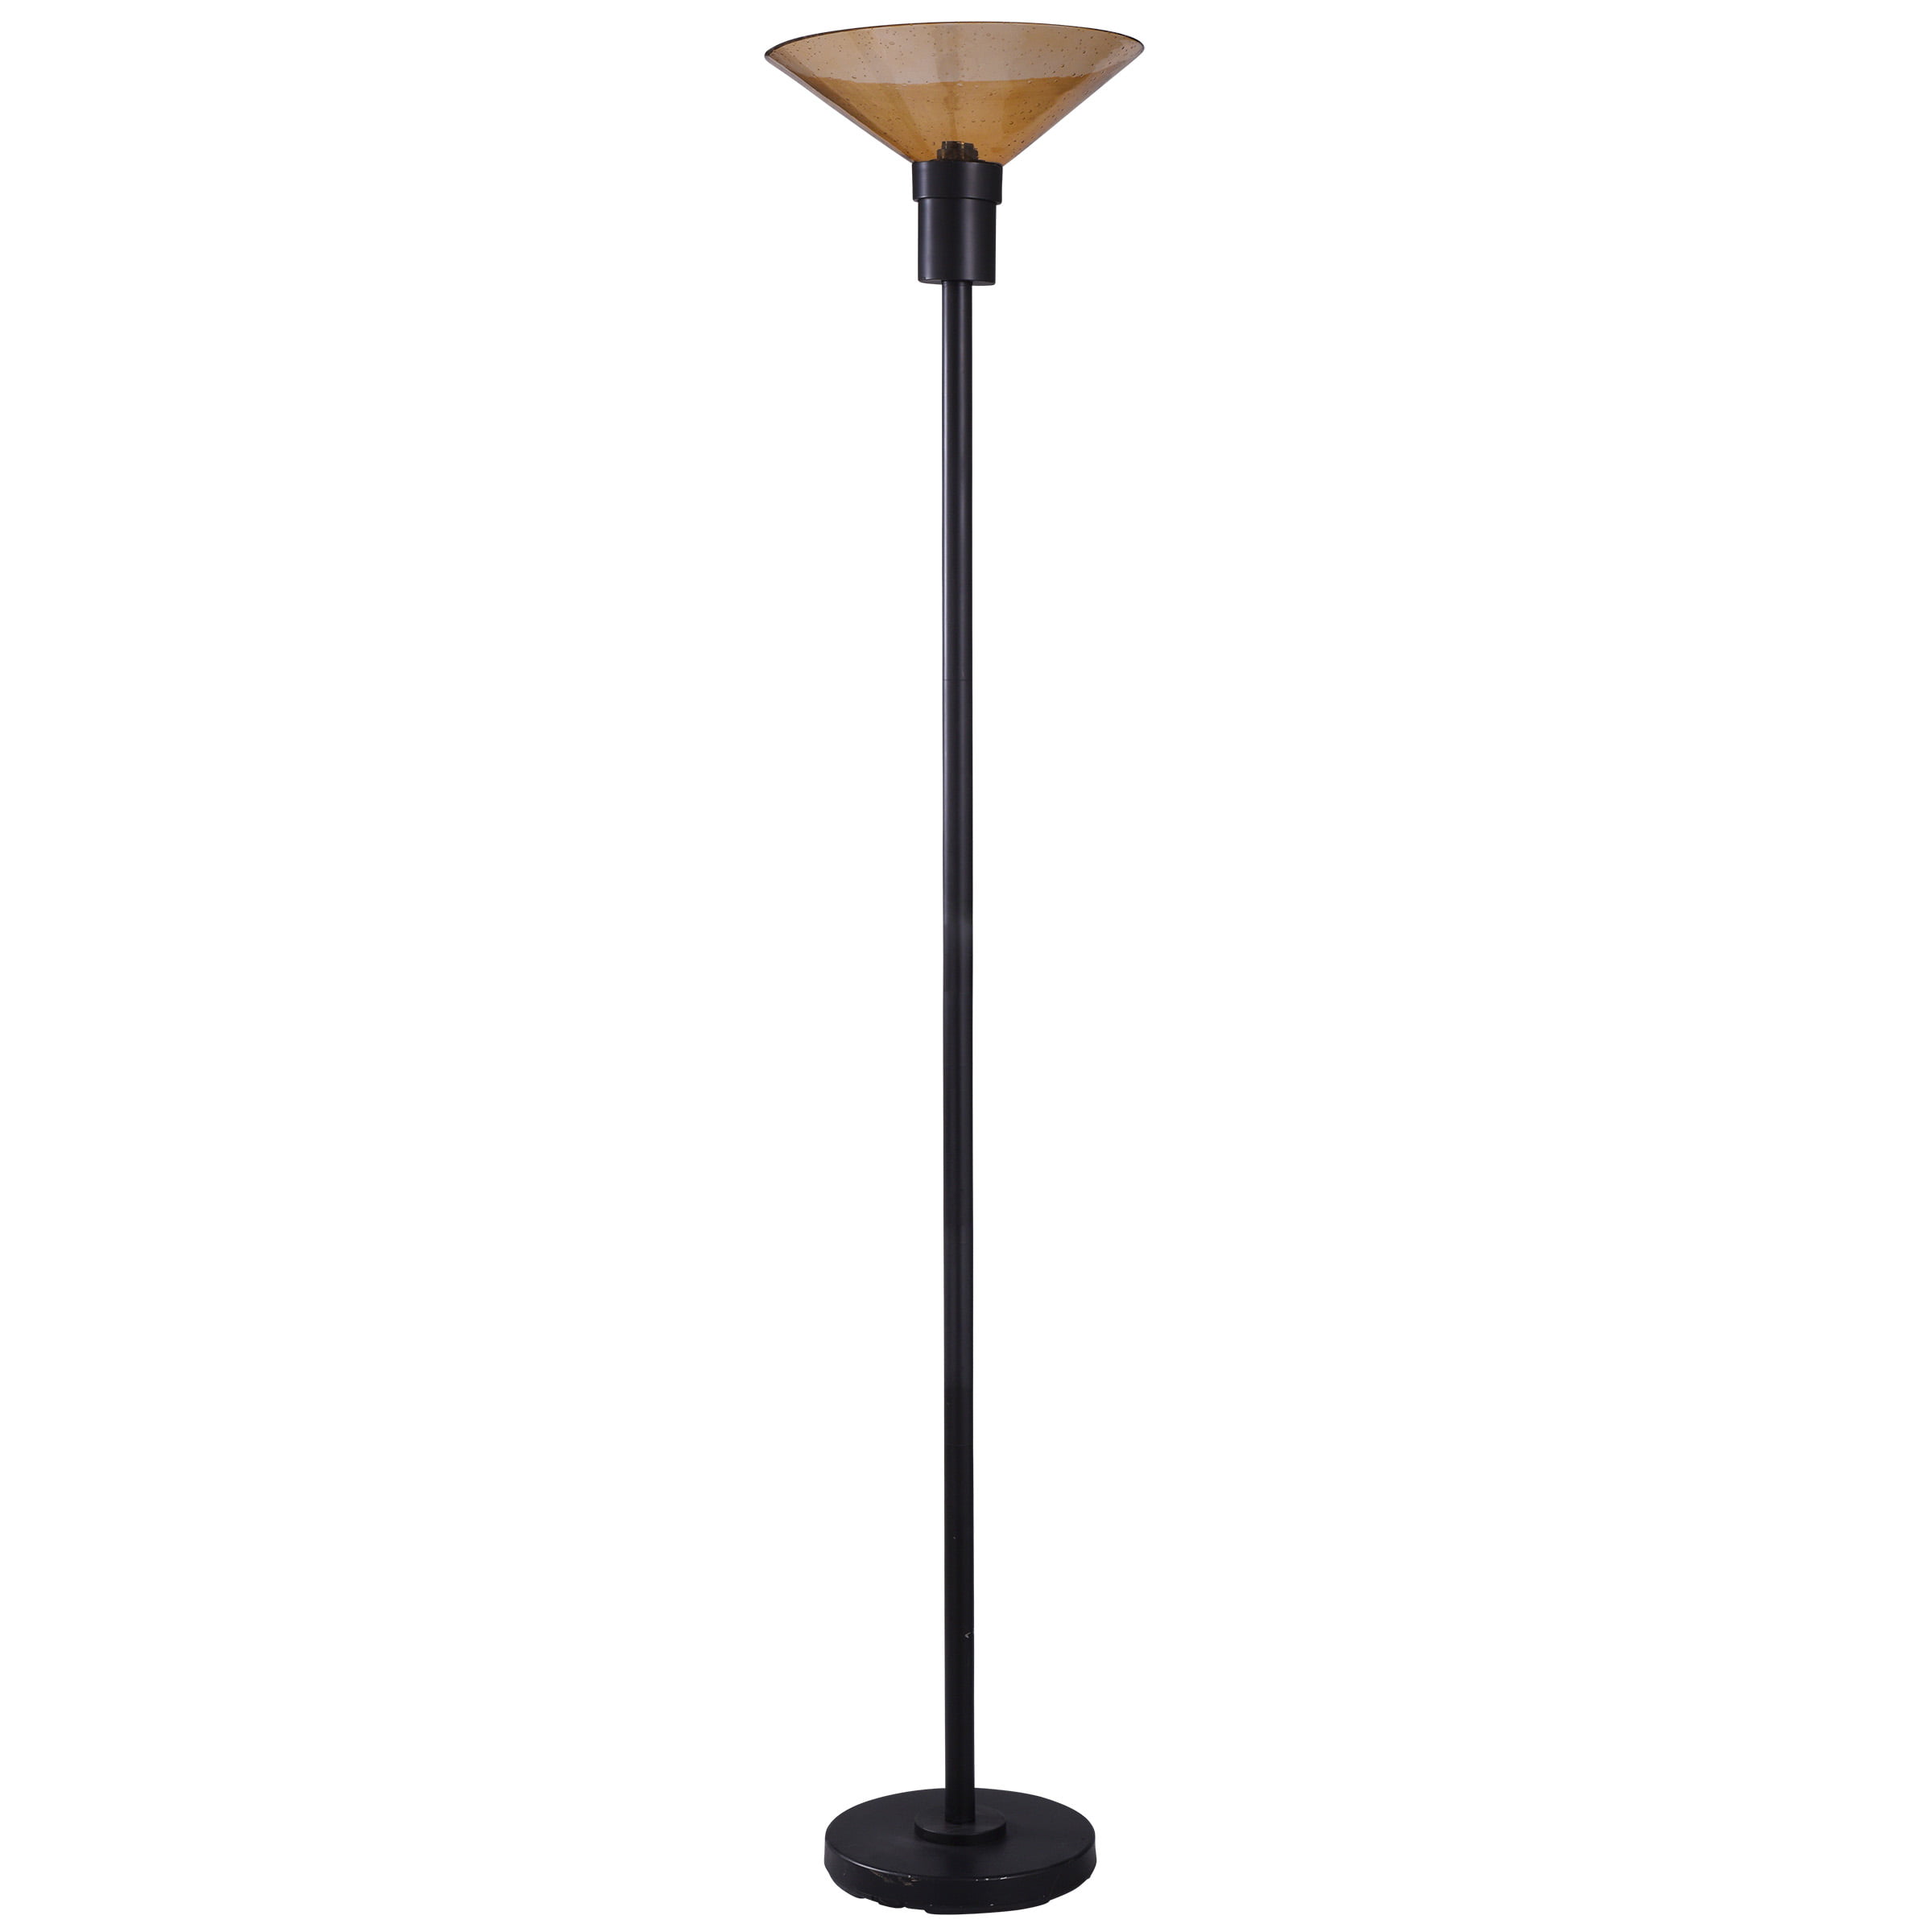 Black Torchiere Floor Lamp Amber, Black Torchiere Floor Lamp With Glass Shade